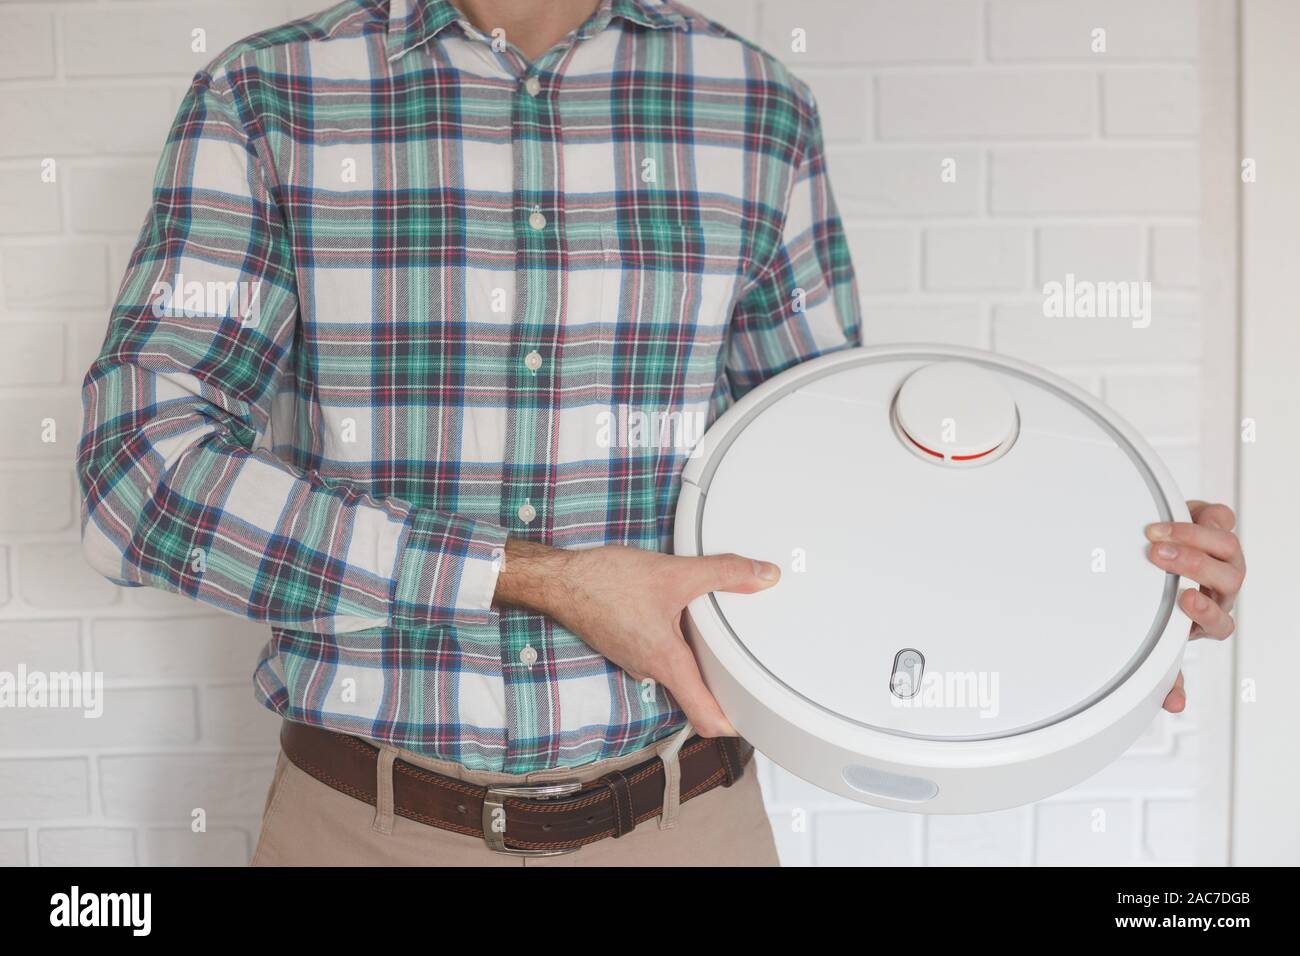 Man with a new robot with a vacuum cleaner in his hands Stock Photo